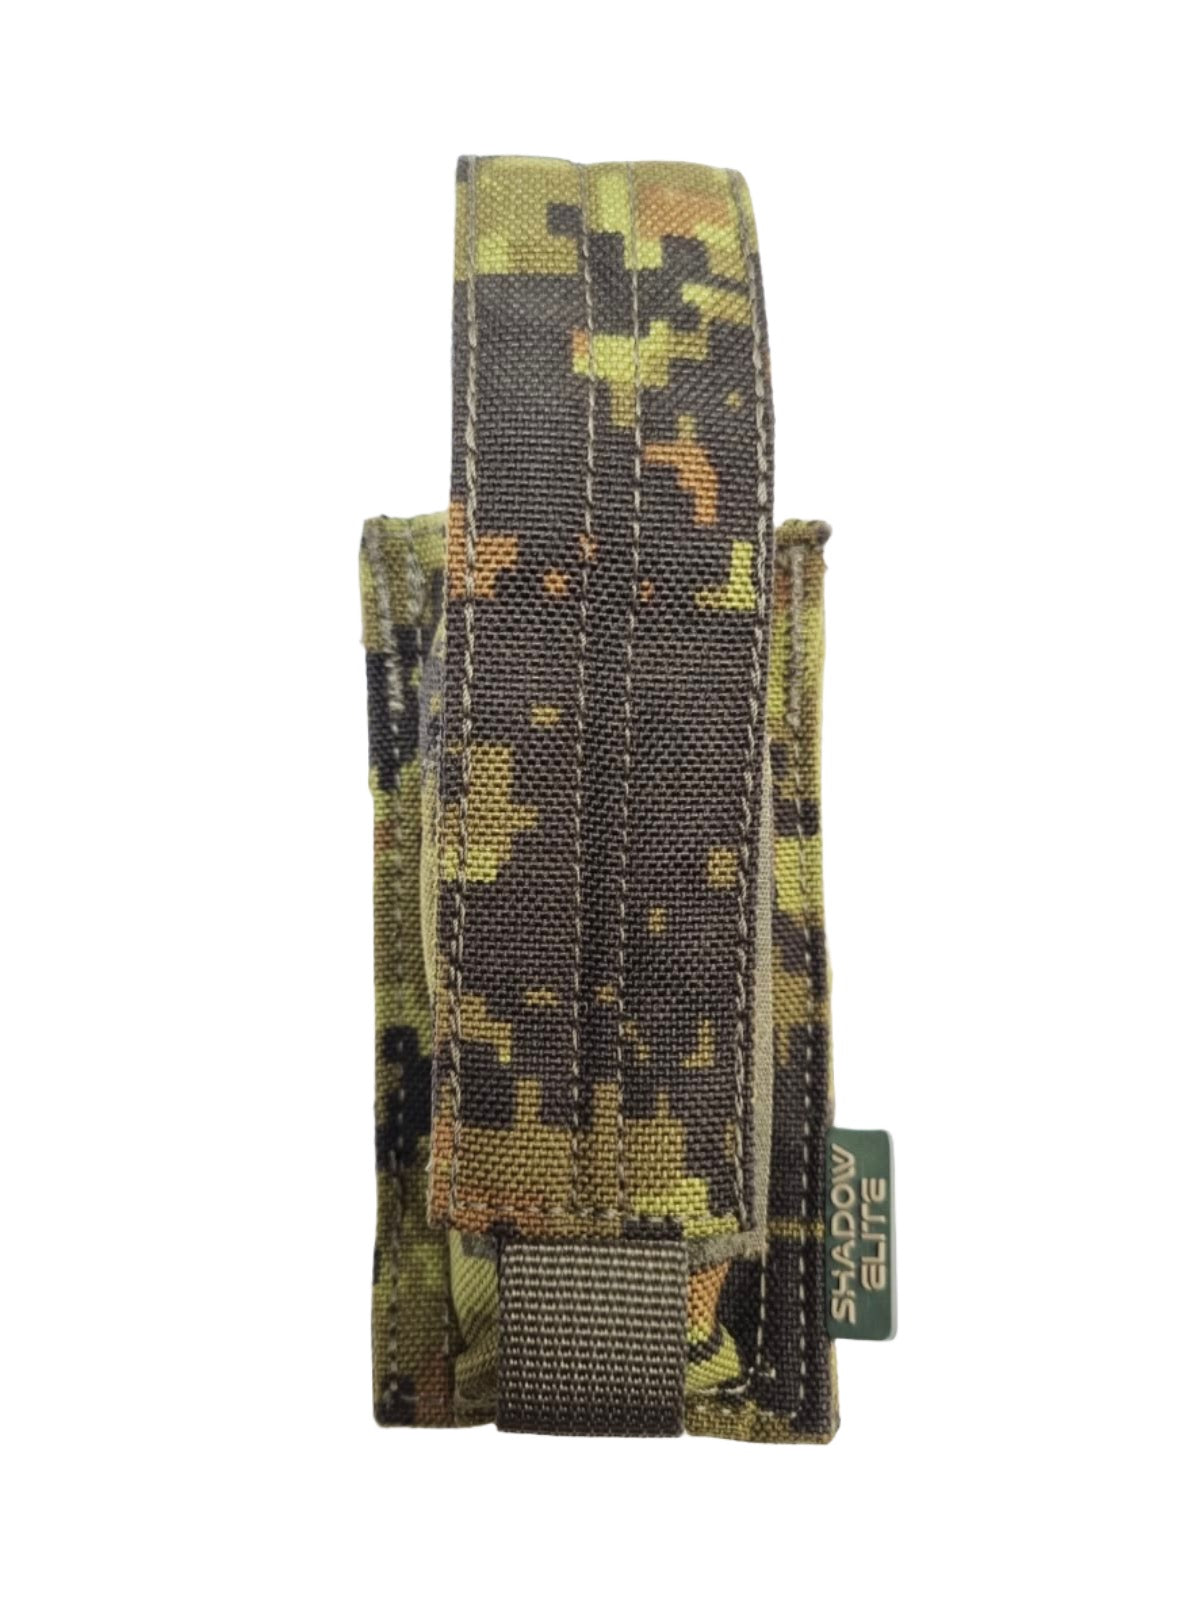 SHE-23029 GRIPTAC SINGLE PISTOL MAG POUCH WOODLAND CAMO / CADPAT